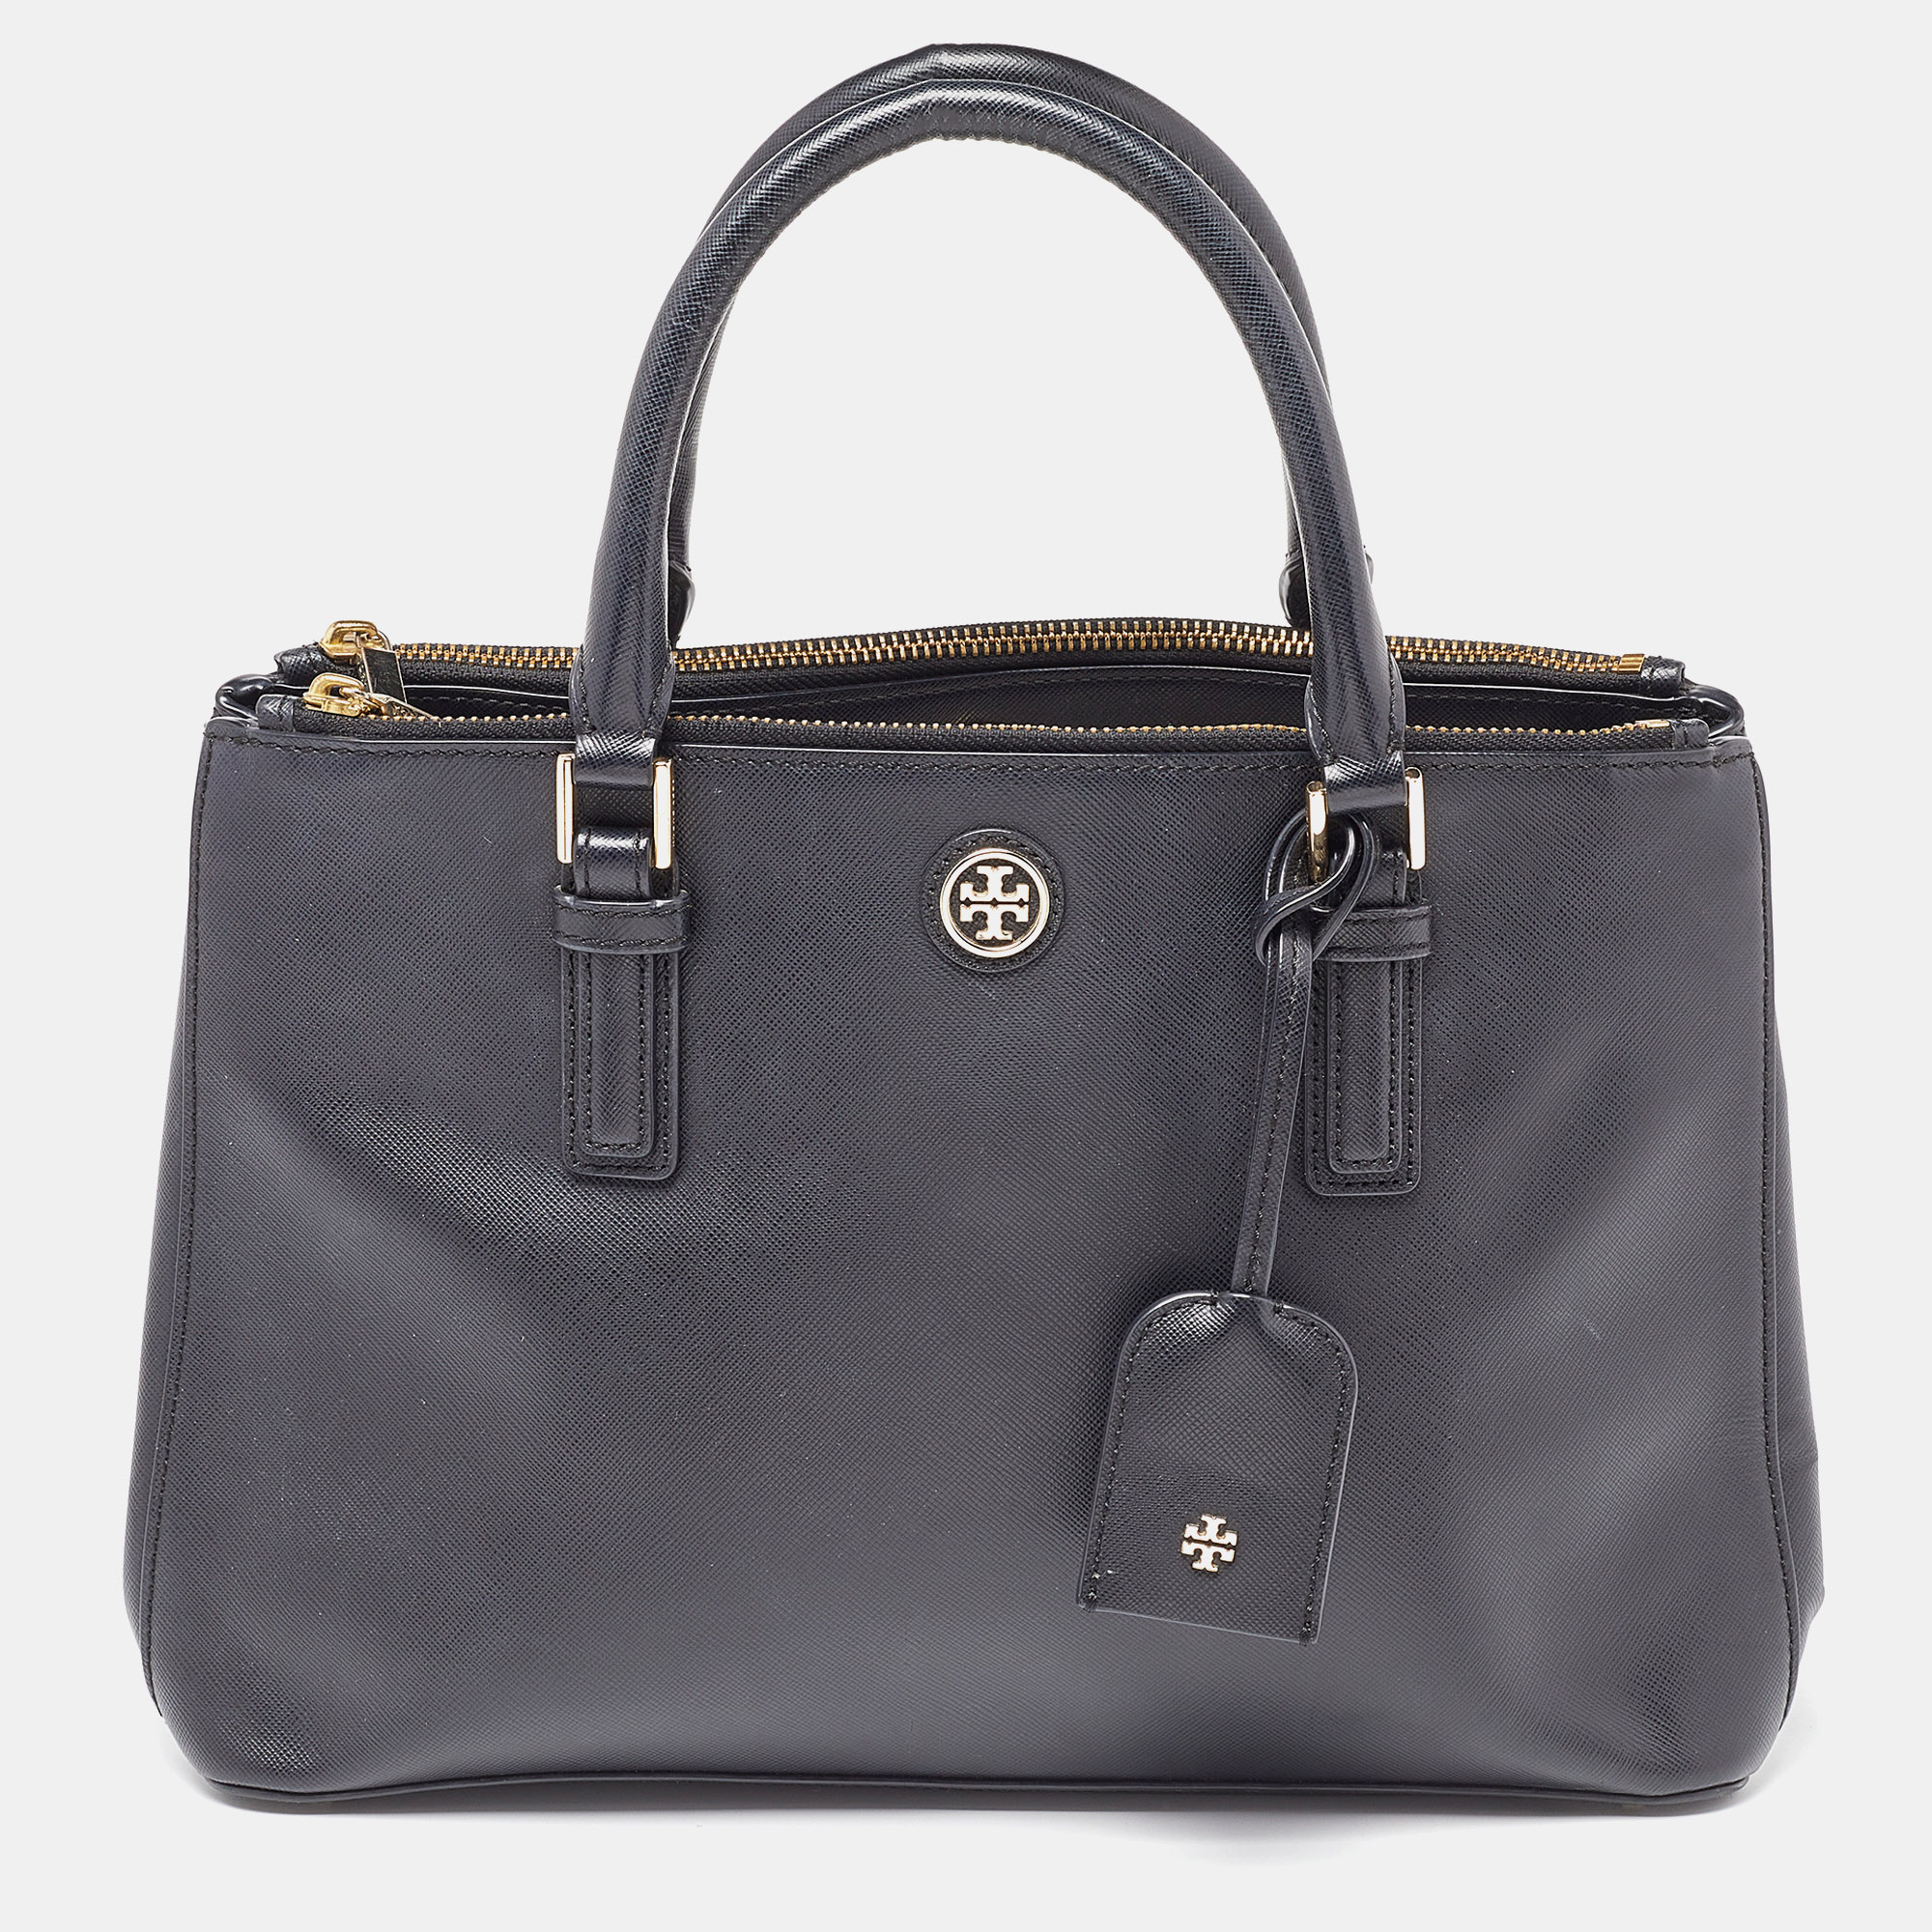 This stunning black tote is by Tory Burch. Crafted from leather and lined with fabric on the insides the bag features a lovely exterior adorned with floral laser cut design all over. It has dual rolled top handles logo on the front and two zipper pockets on the top.